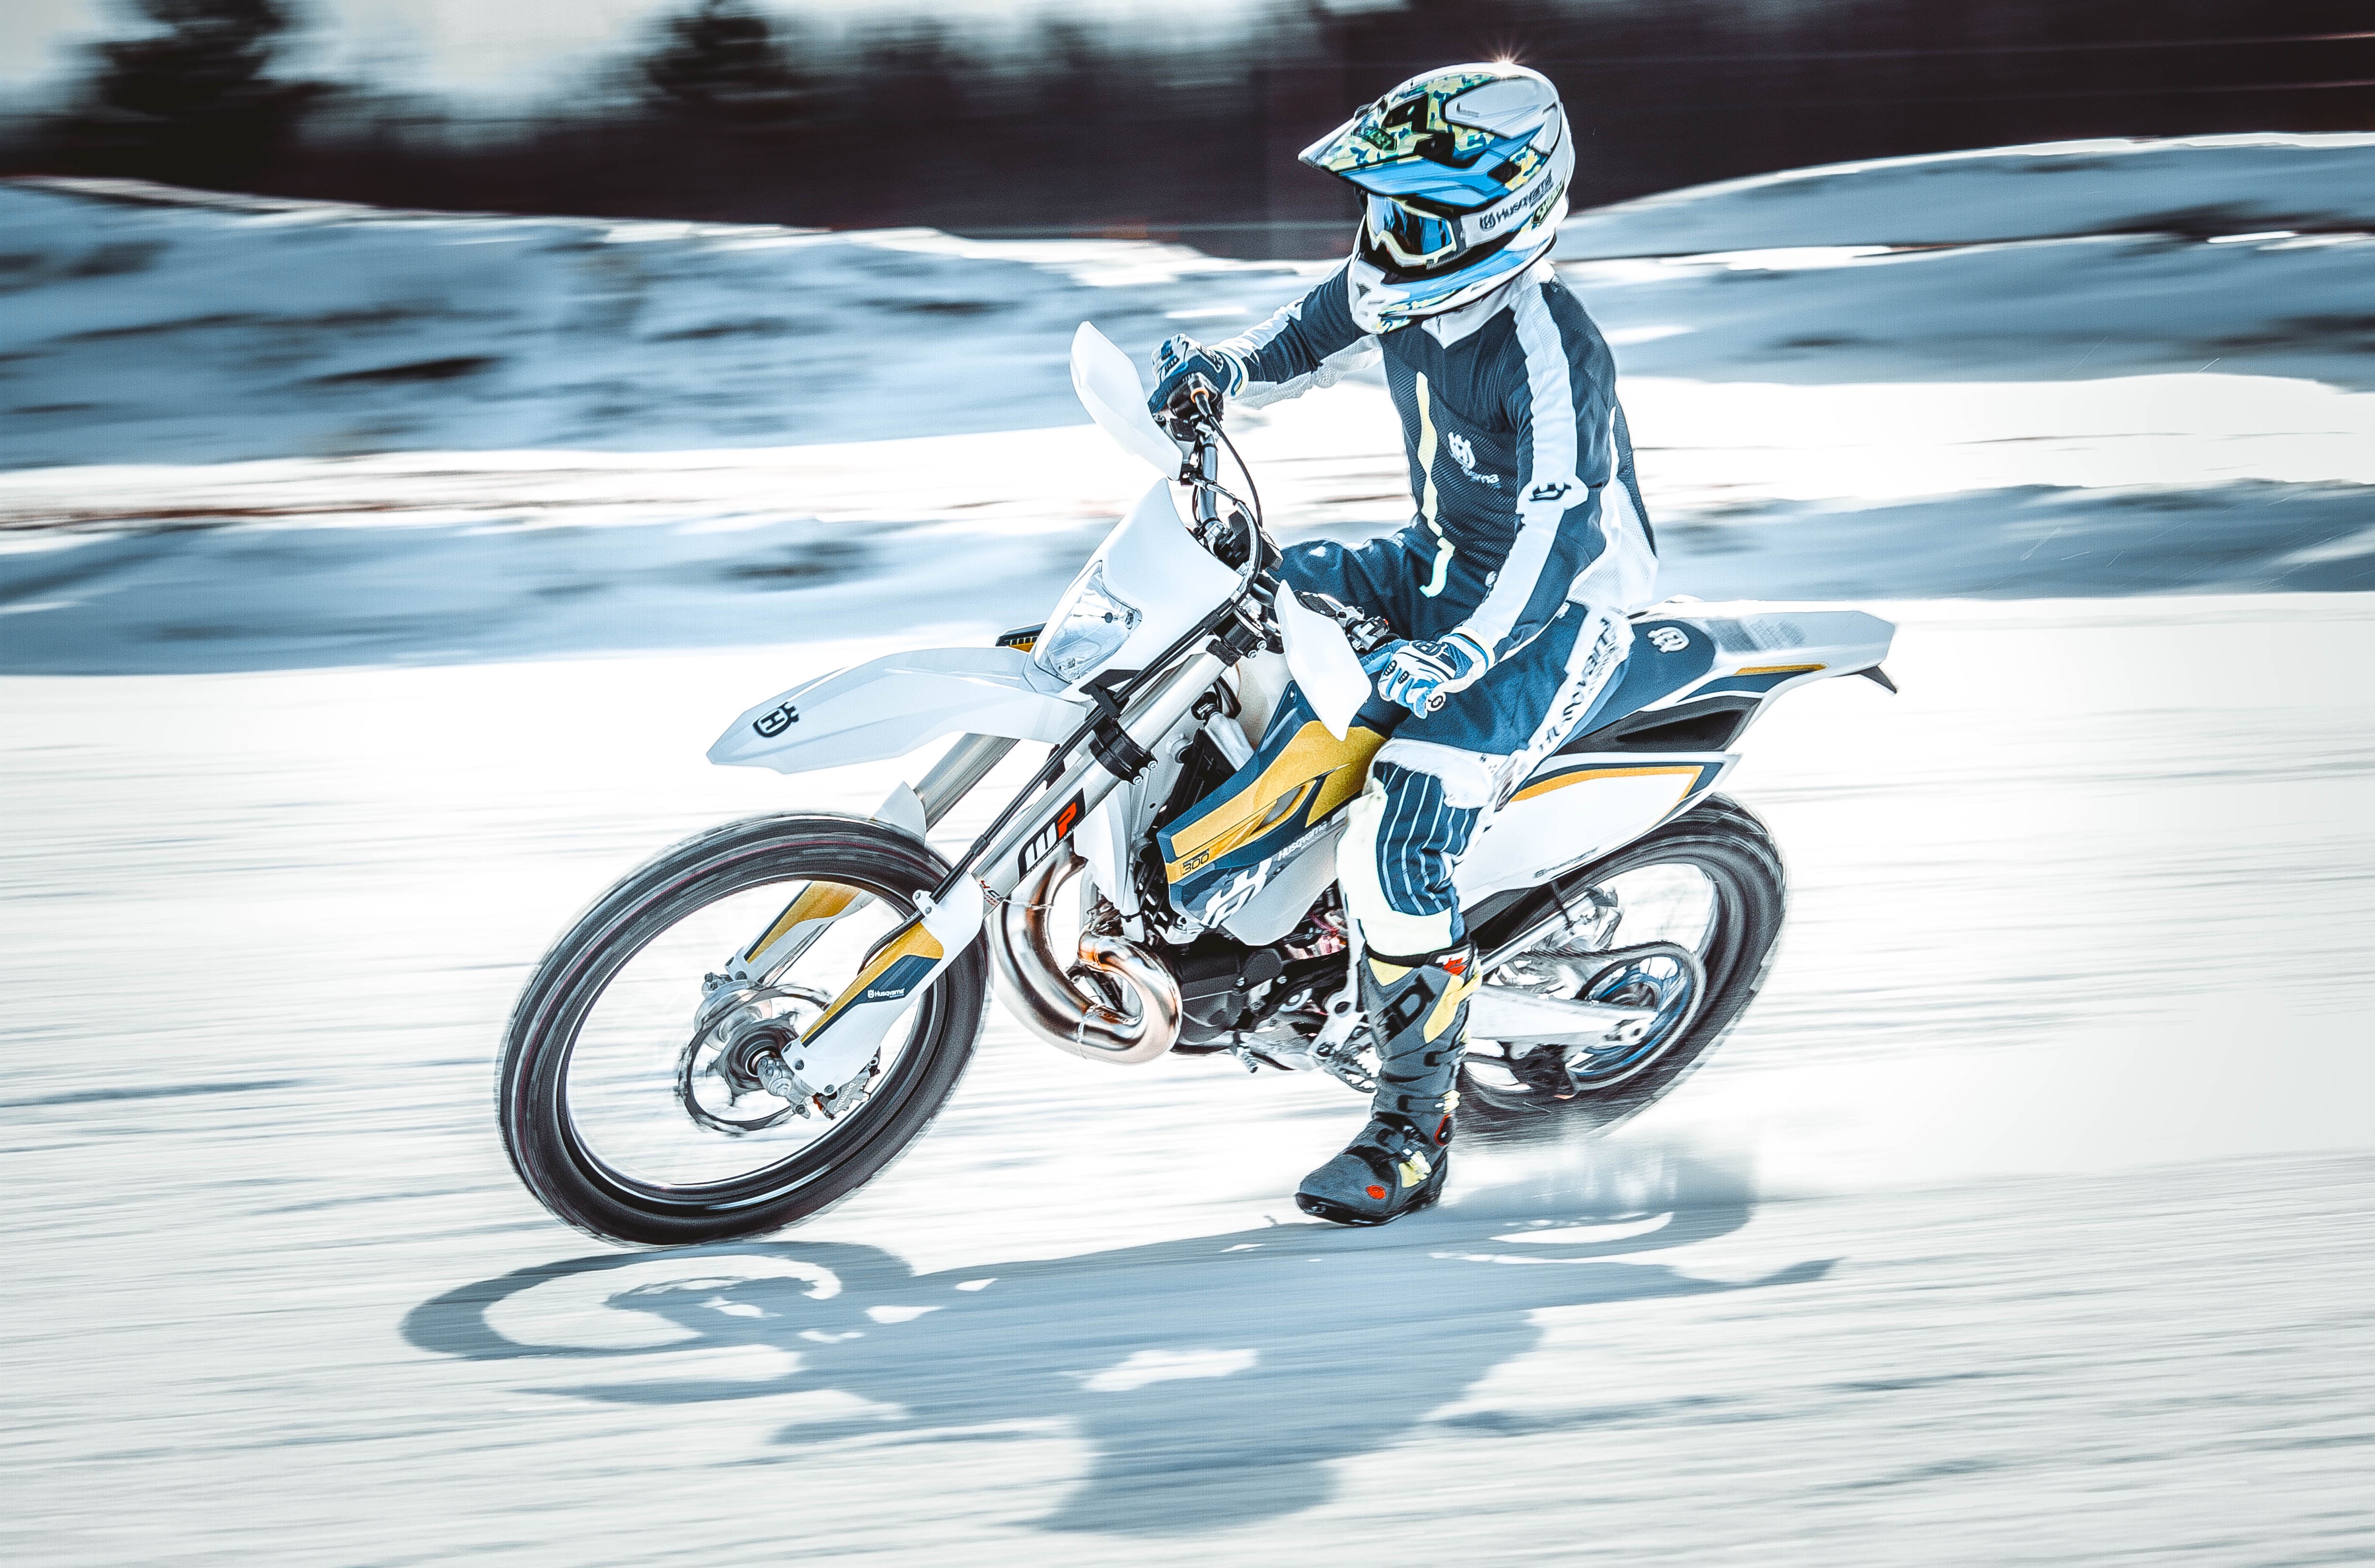 Full HD snow, motorcycles, motorcyclist, speed